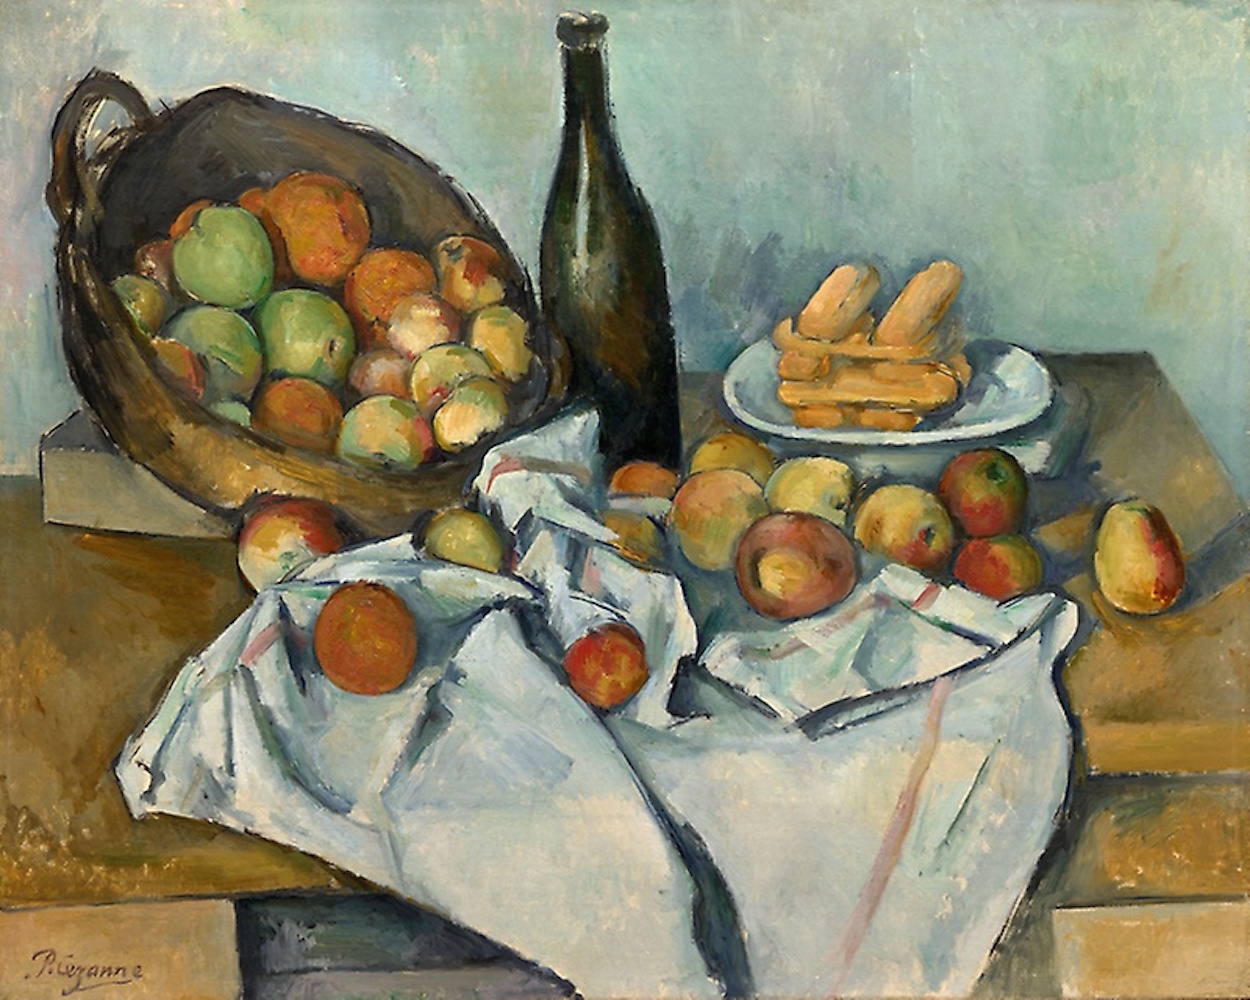 The Basket of Apples by Paul Cézanne - c. 1893 - 65 x 80 cm Art Institute of Chicago